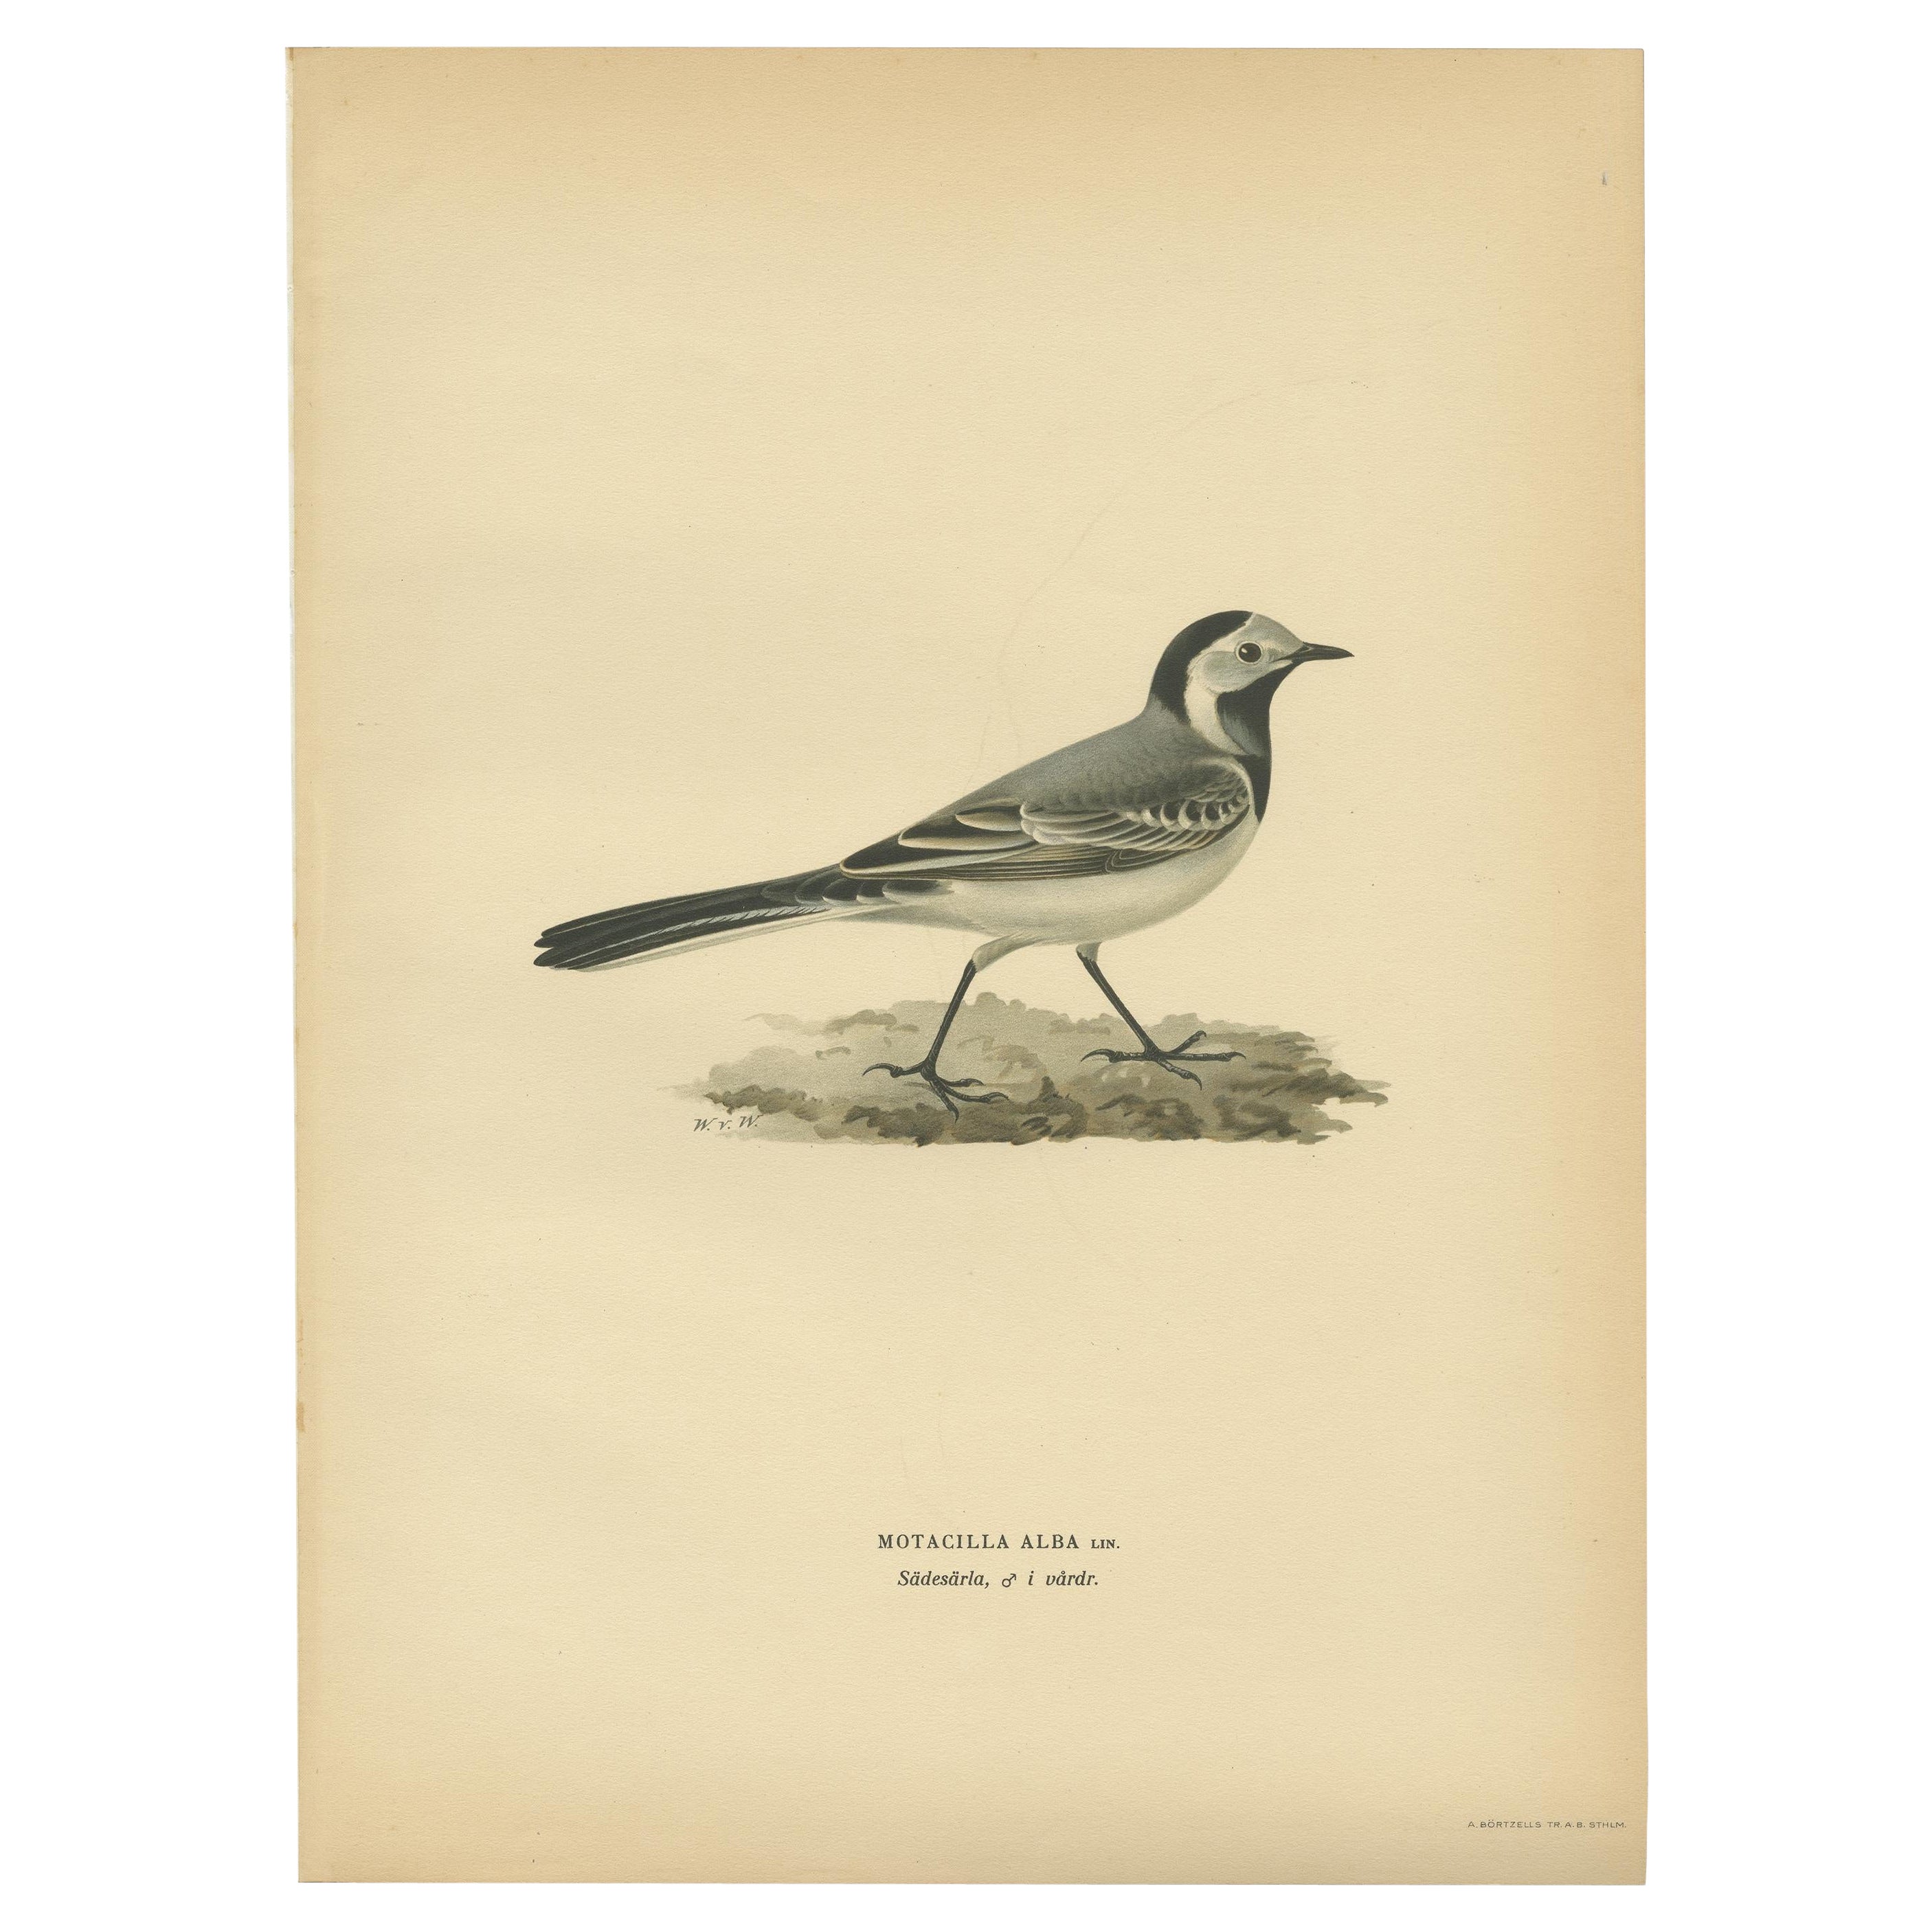 Antique Bird Print of The White Wagtail by Von Wright, 1927